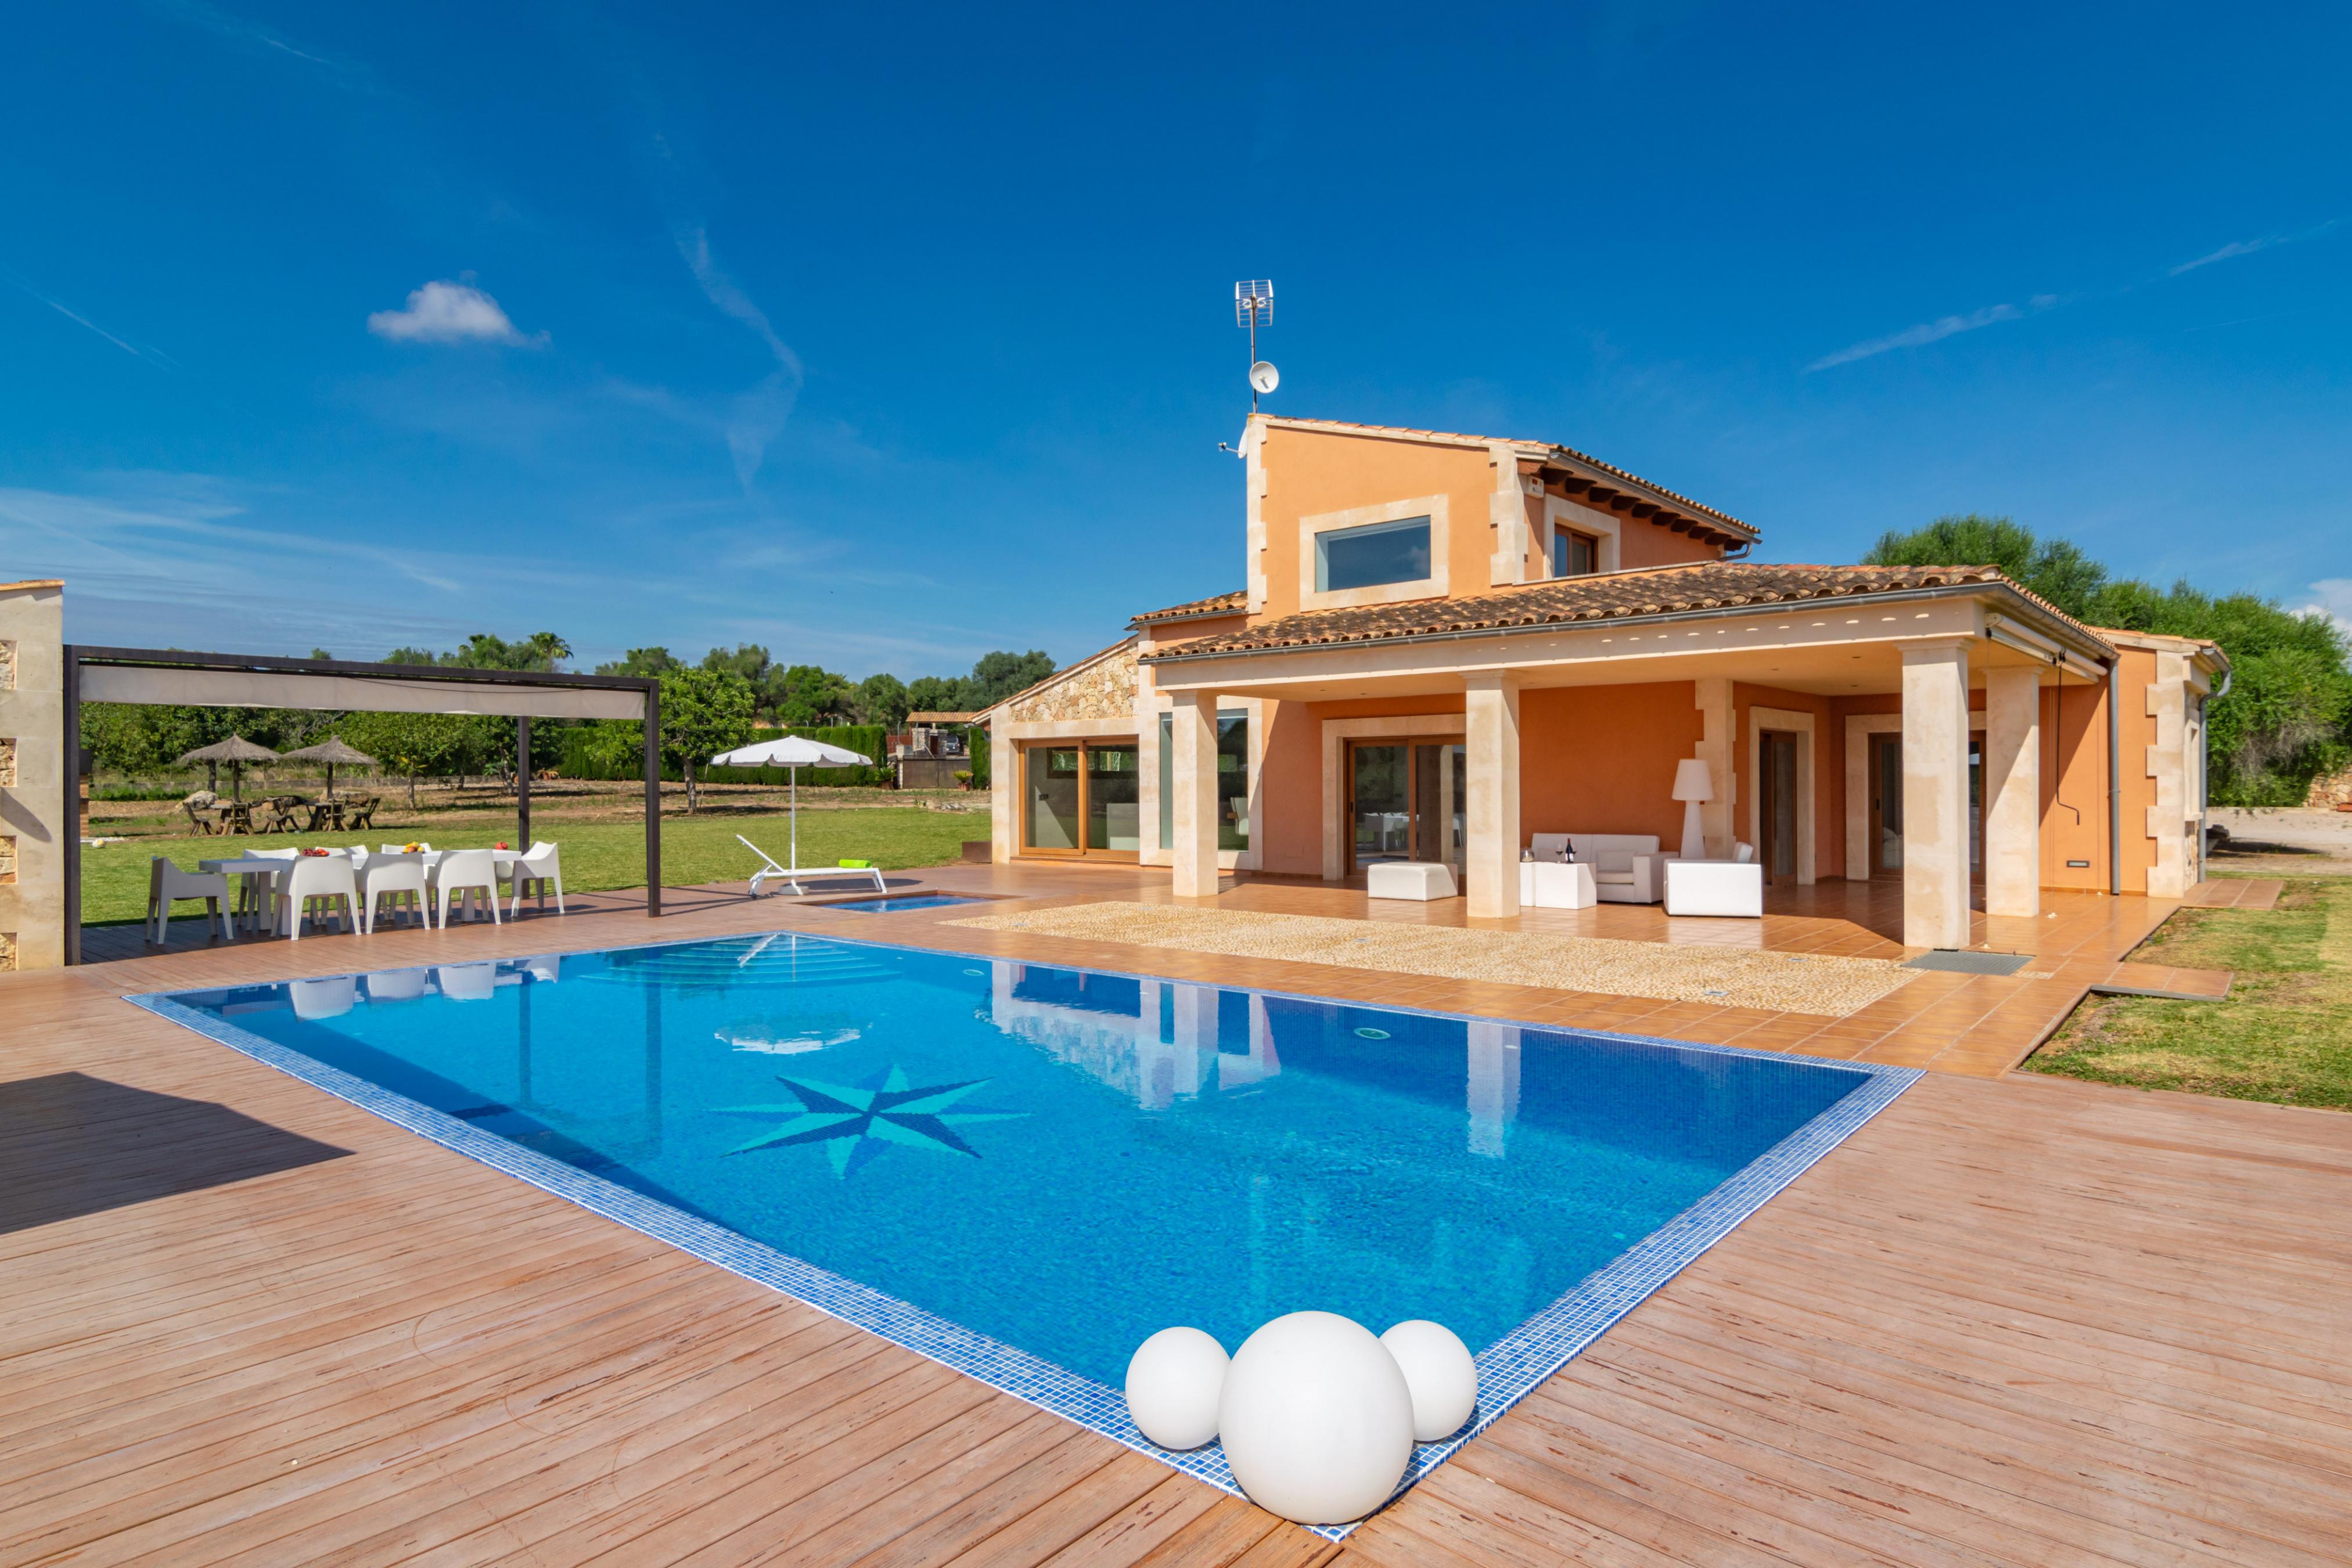 Property Image 2 - SON MOREI DE SES PENYES - Superb villa with private pool and free WiFi.